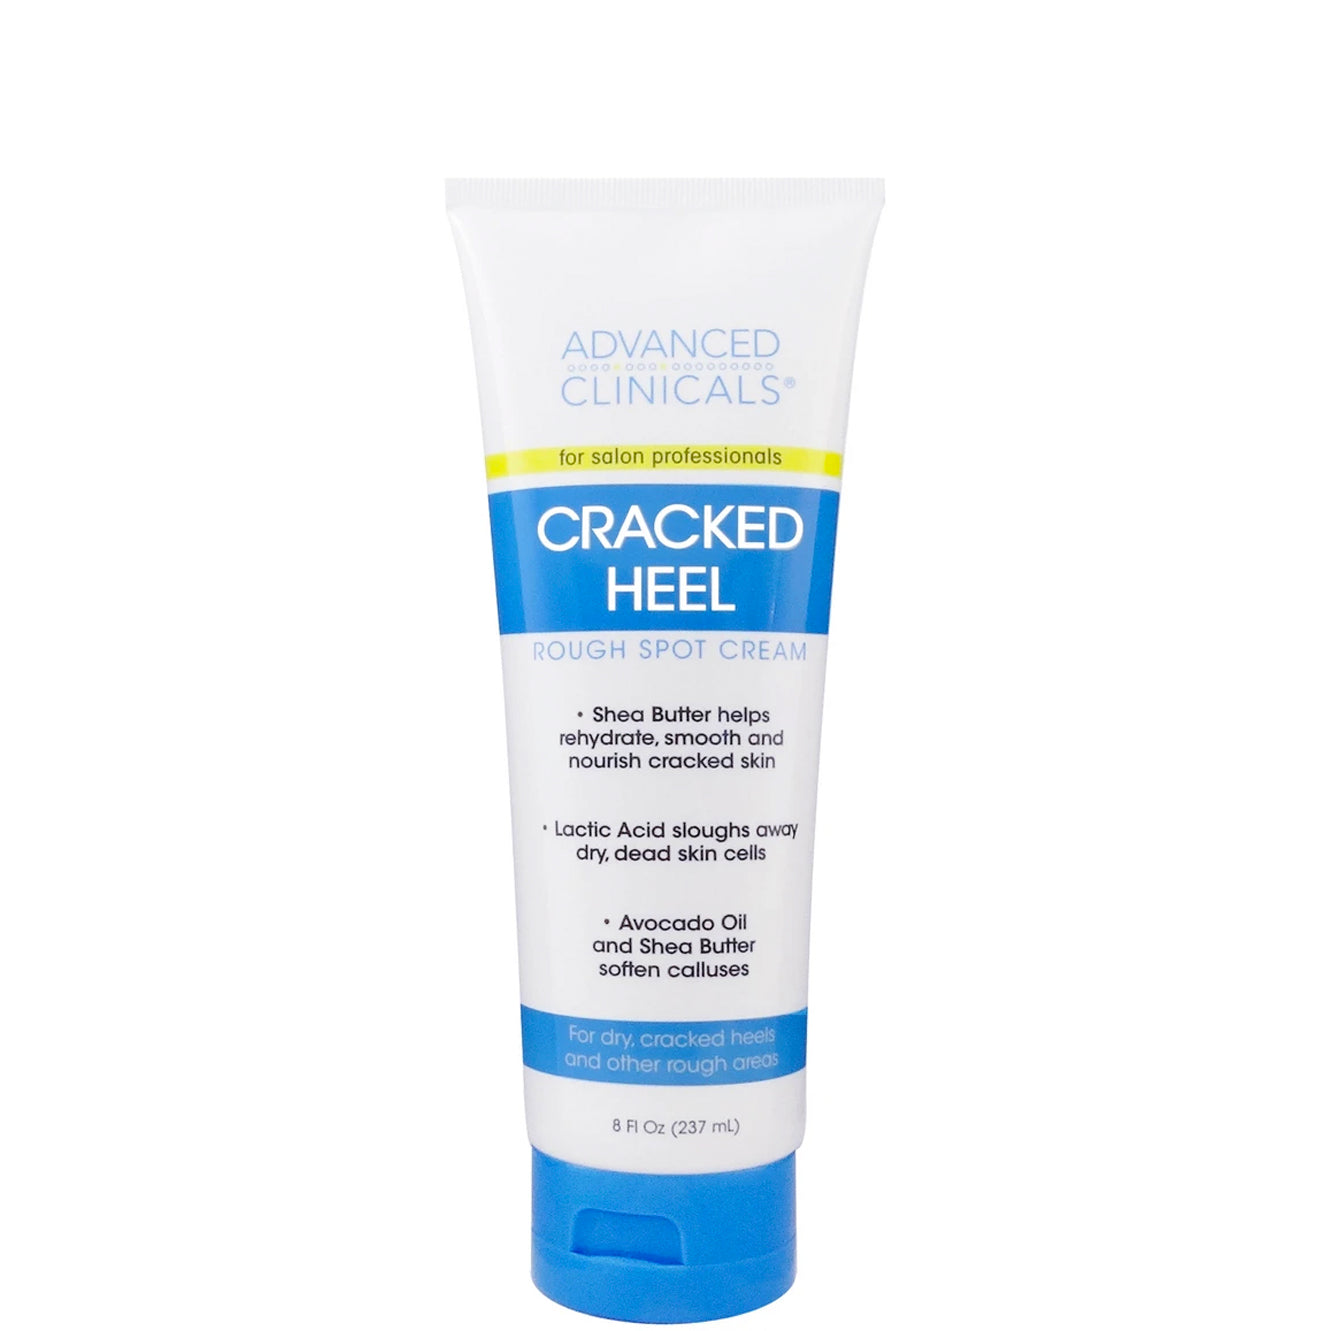 Dr. Scholl's Cracked Heel Repair Balm 2.5oz, with 25% Urea for Dry Cracked  Feet, Heals and Moisturizes for Healthy Feet : Amazon.in: Health & Personal  Care